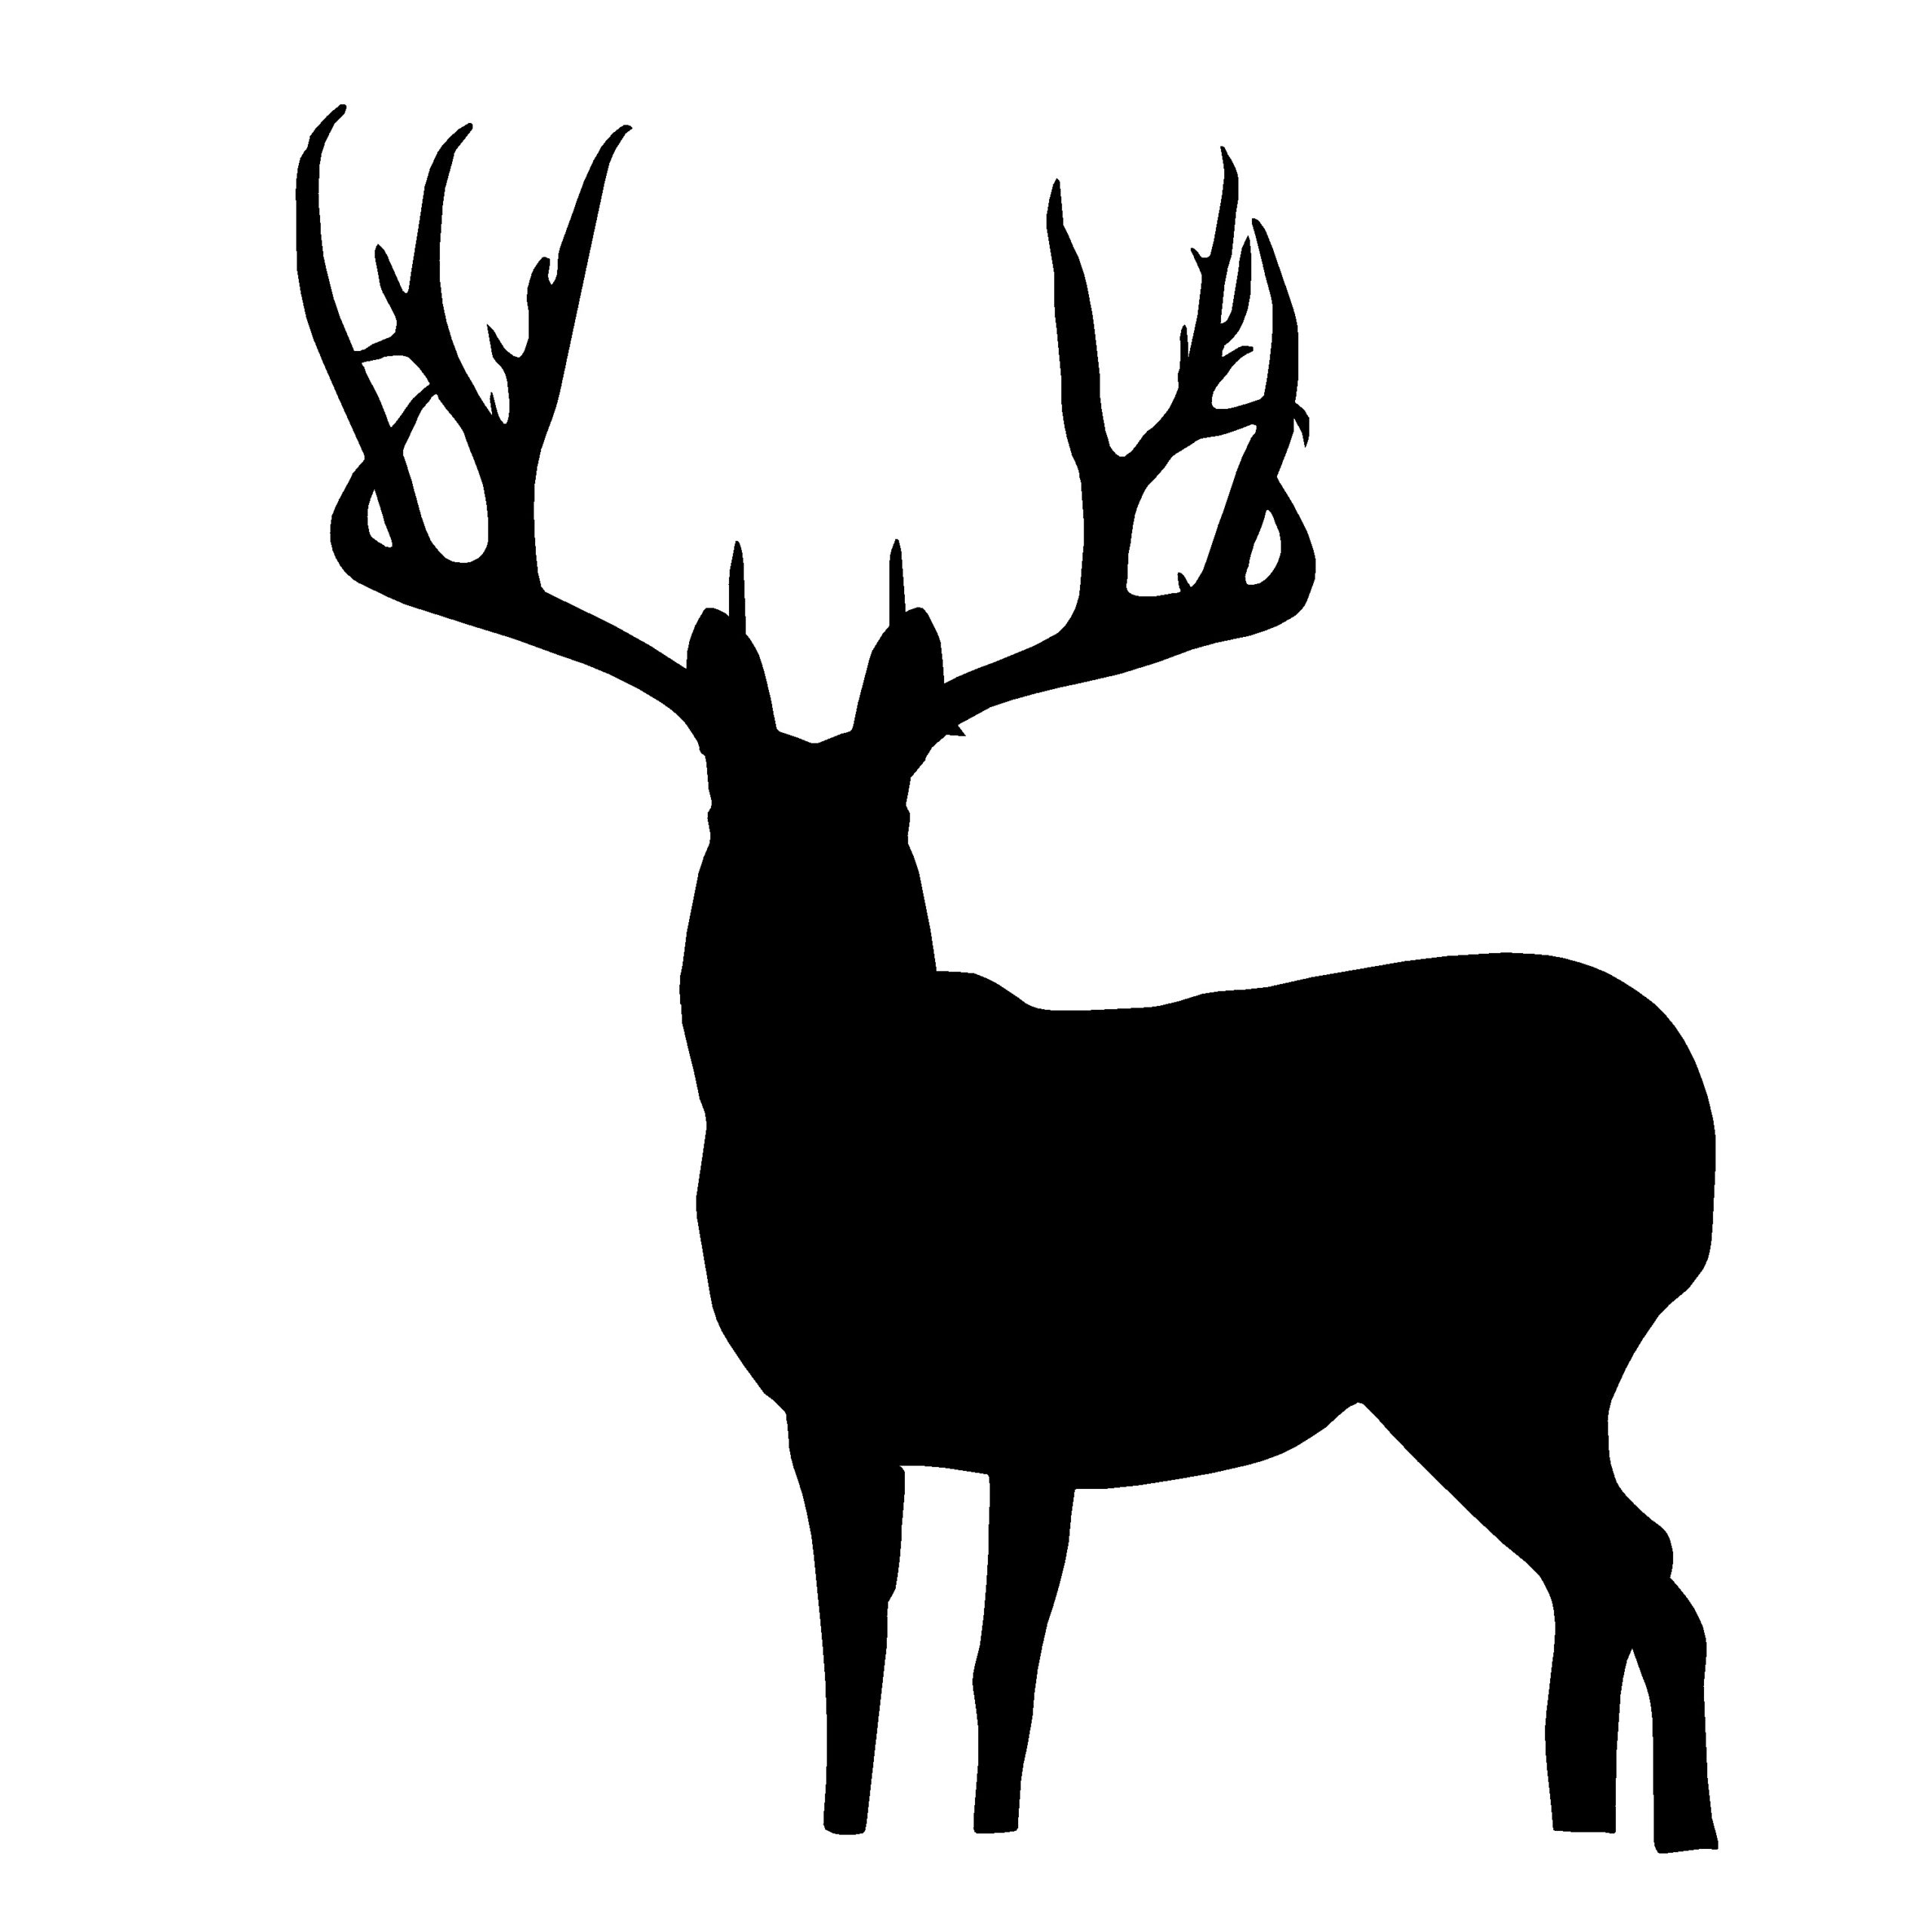 deer hunting stickers for trucks